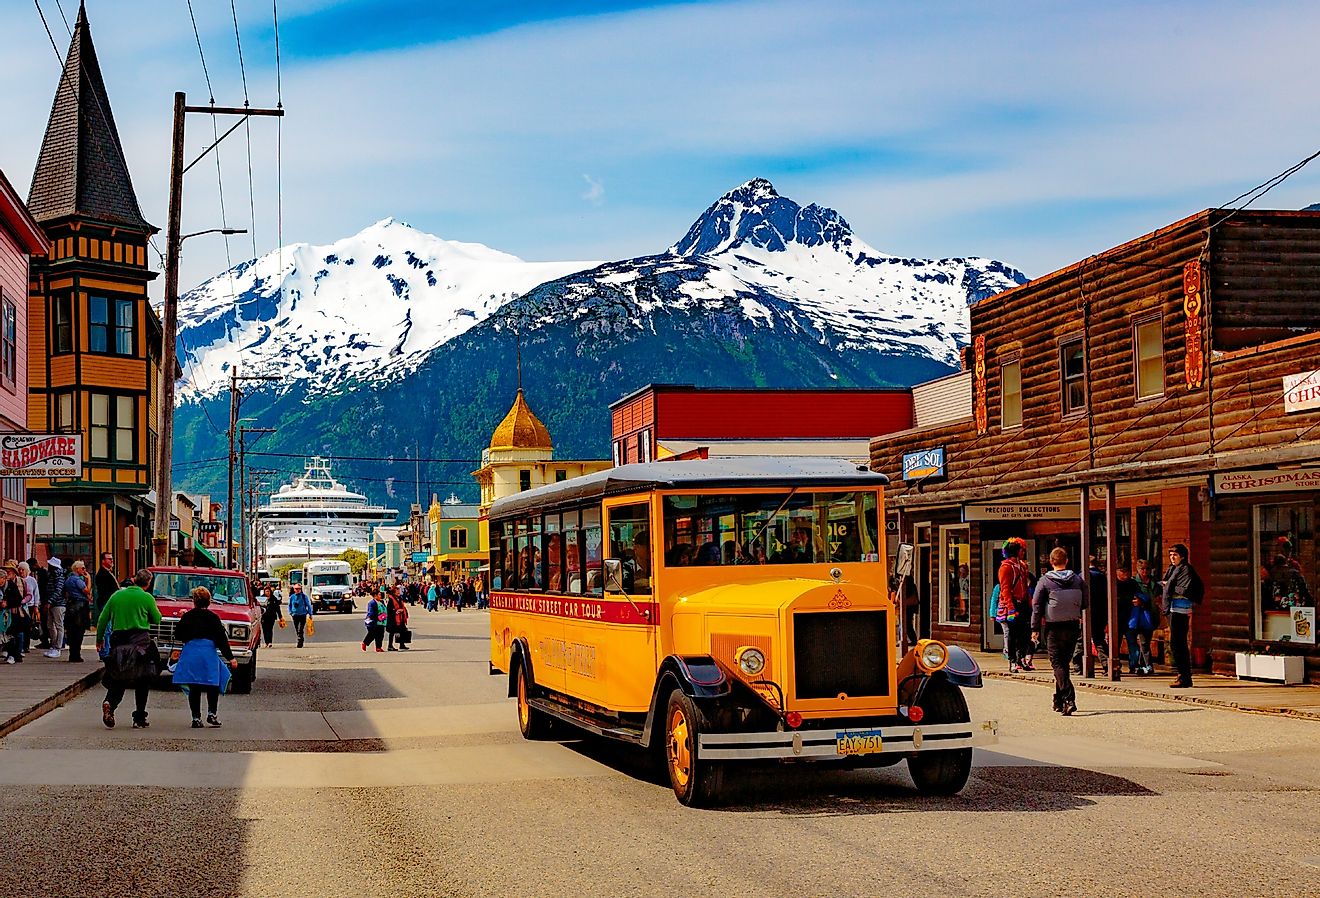  Downtown Skagway bustles with cruise passengers enjoying the natural beauty and the transportation options. Image credit Daniel Shumny via Shutterstock